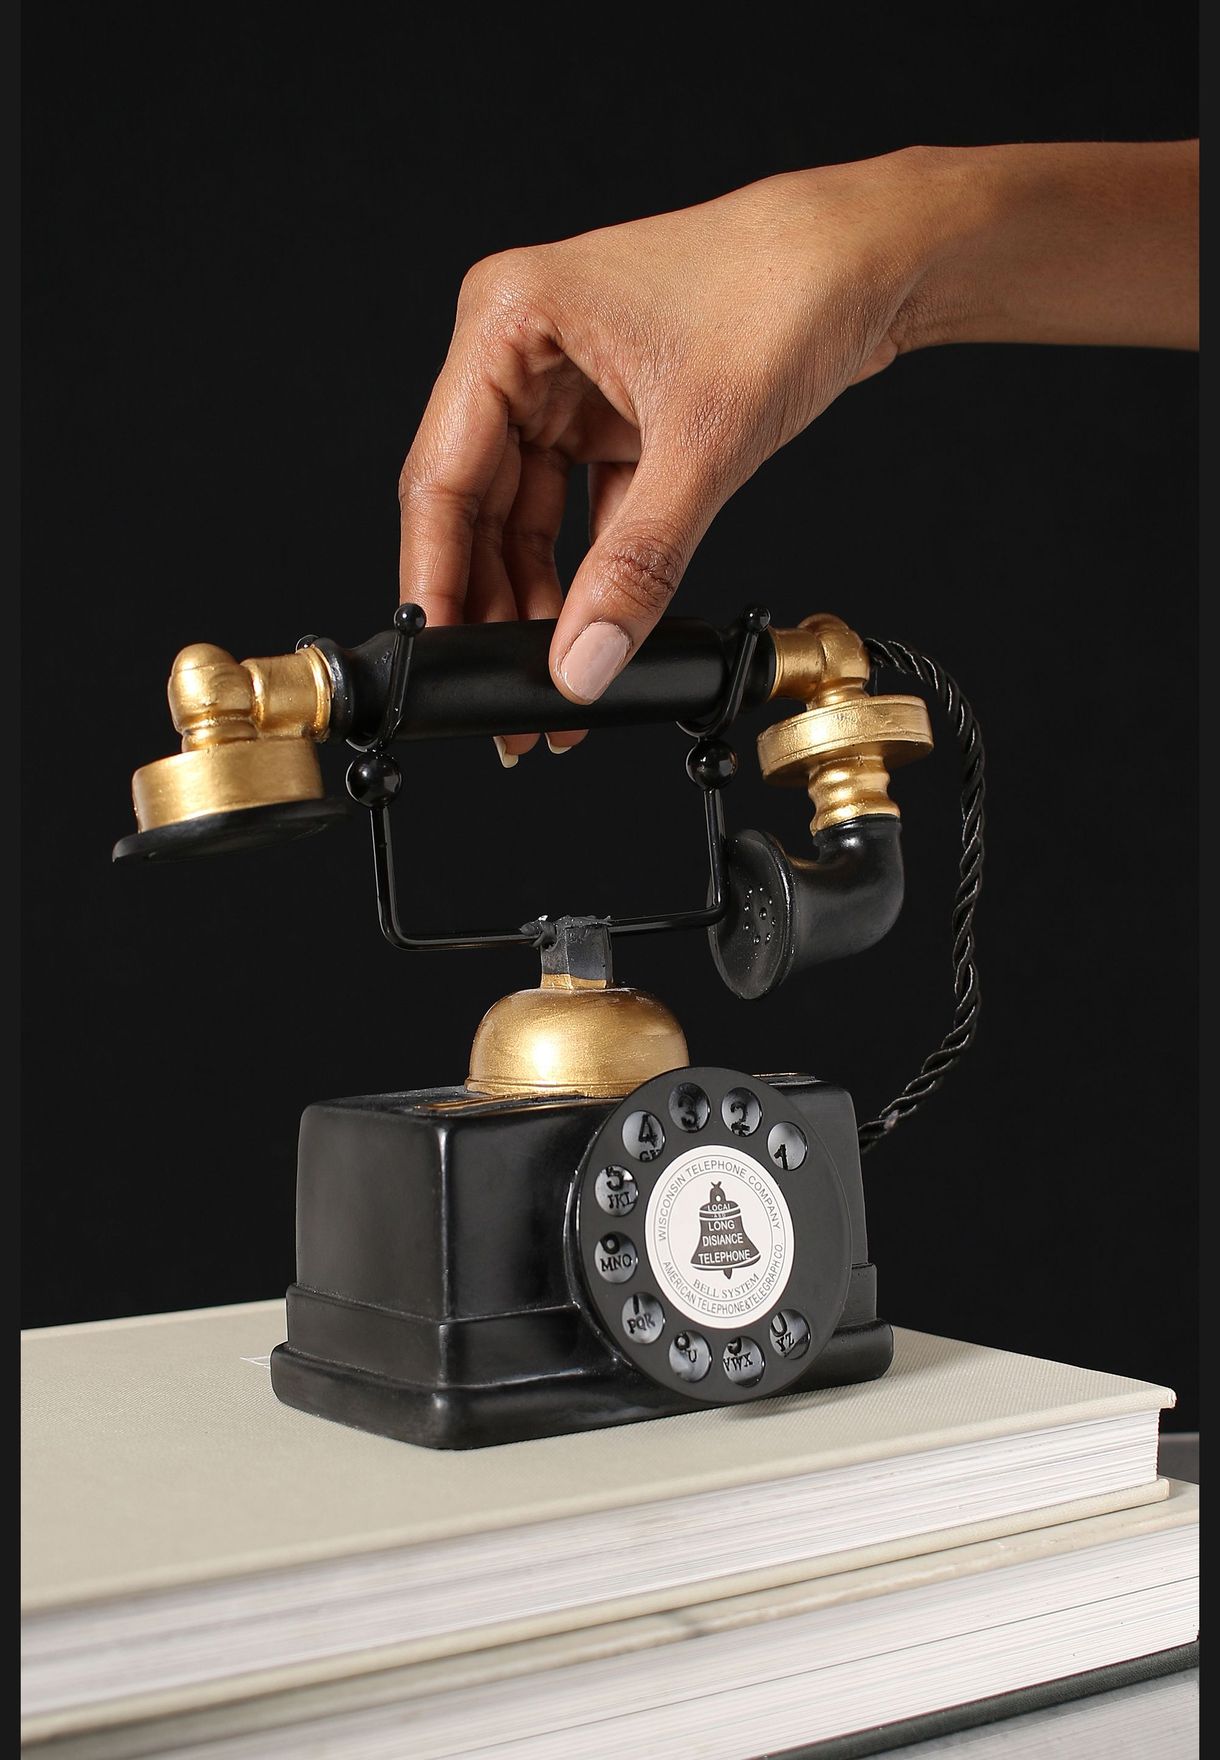 Vintage Telephone Shaped Solid Minimalistic Ceramic Showpiece For Home Decor 